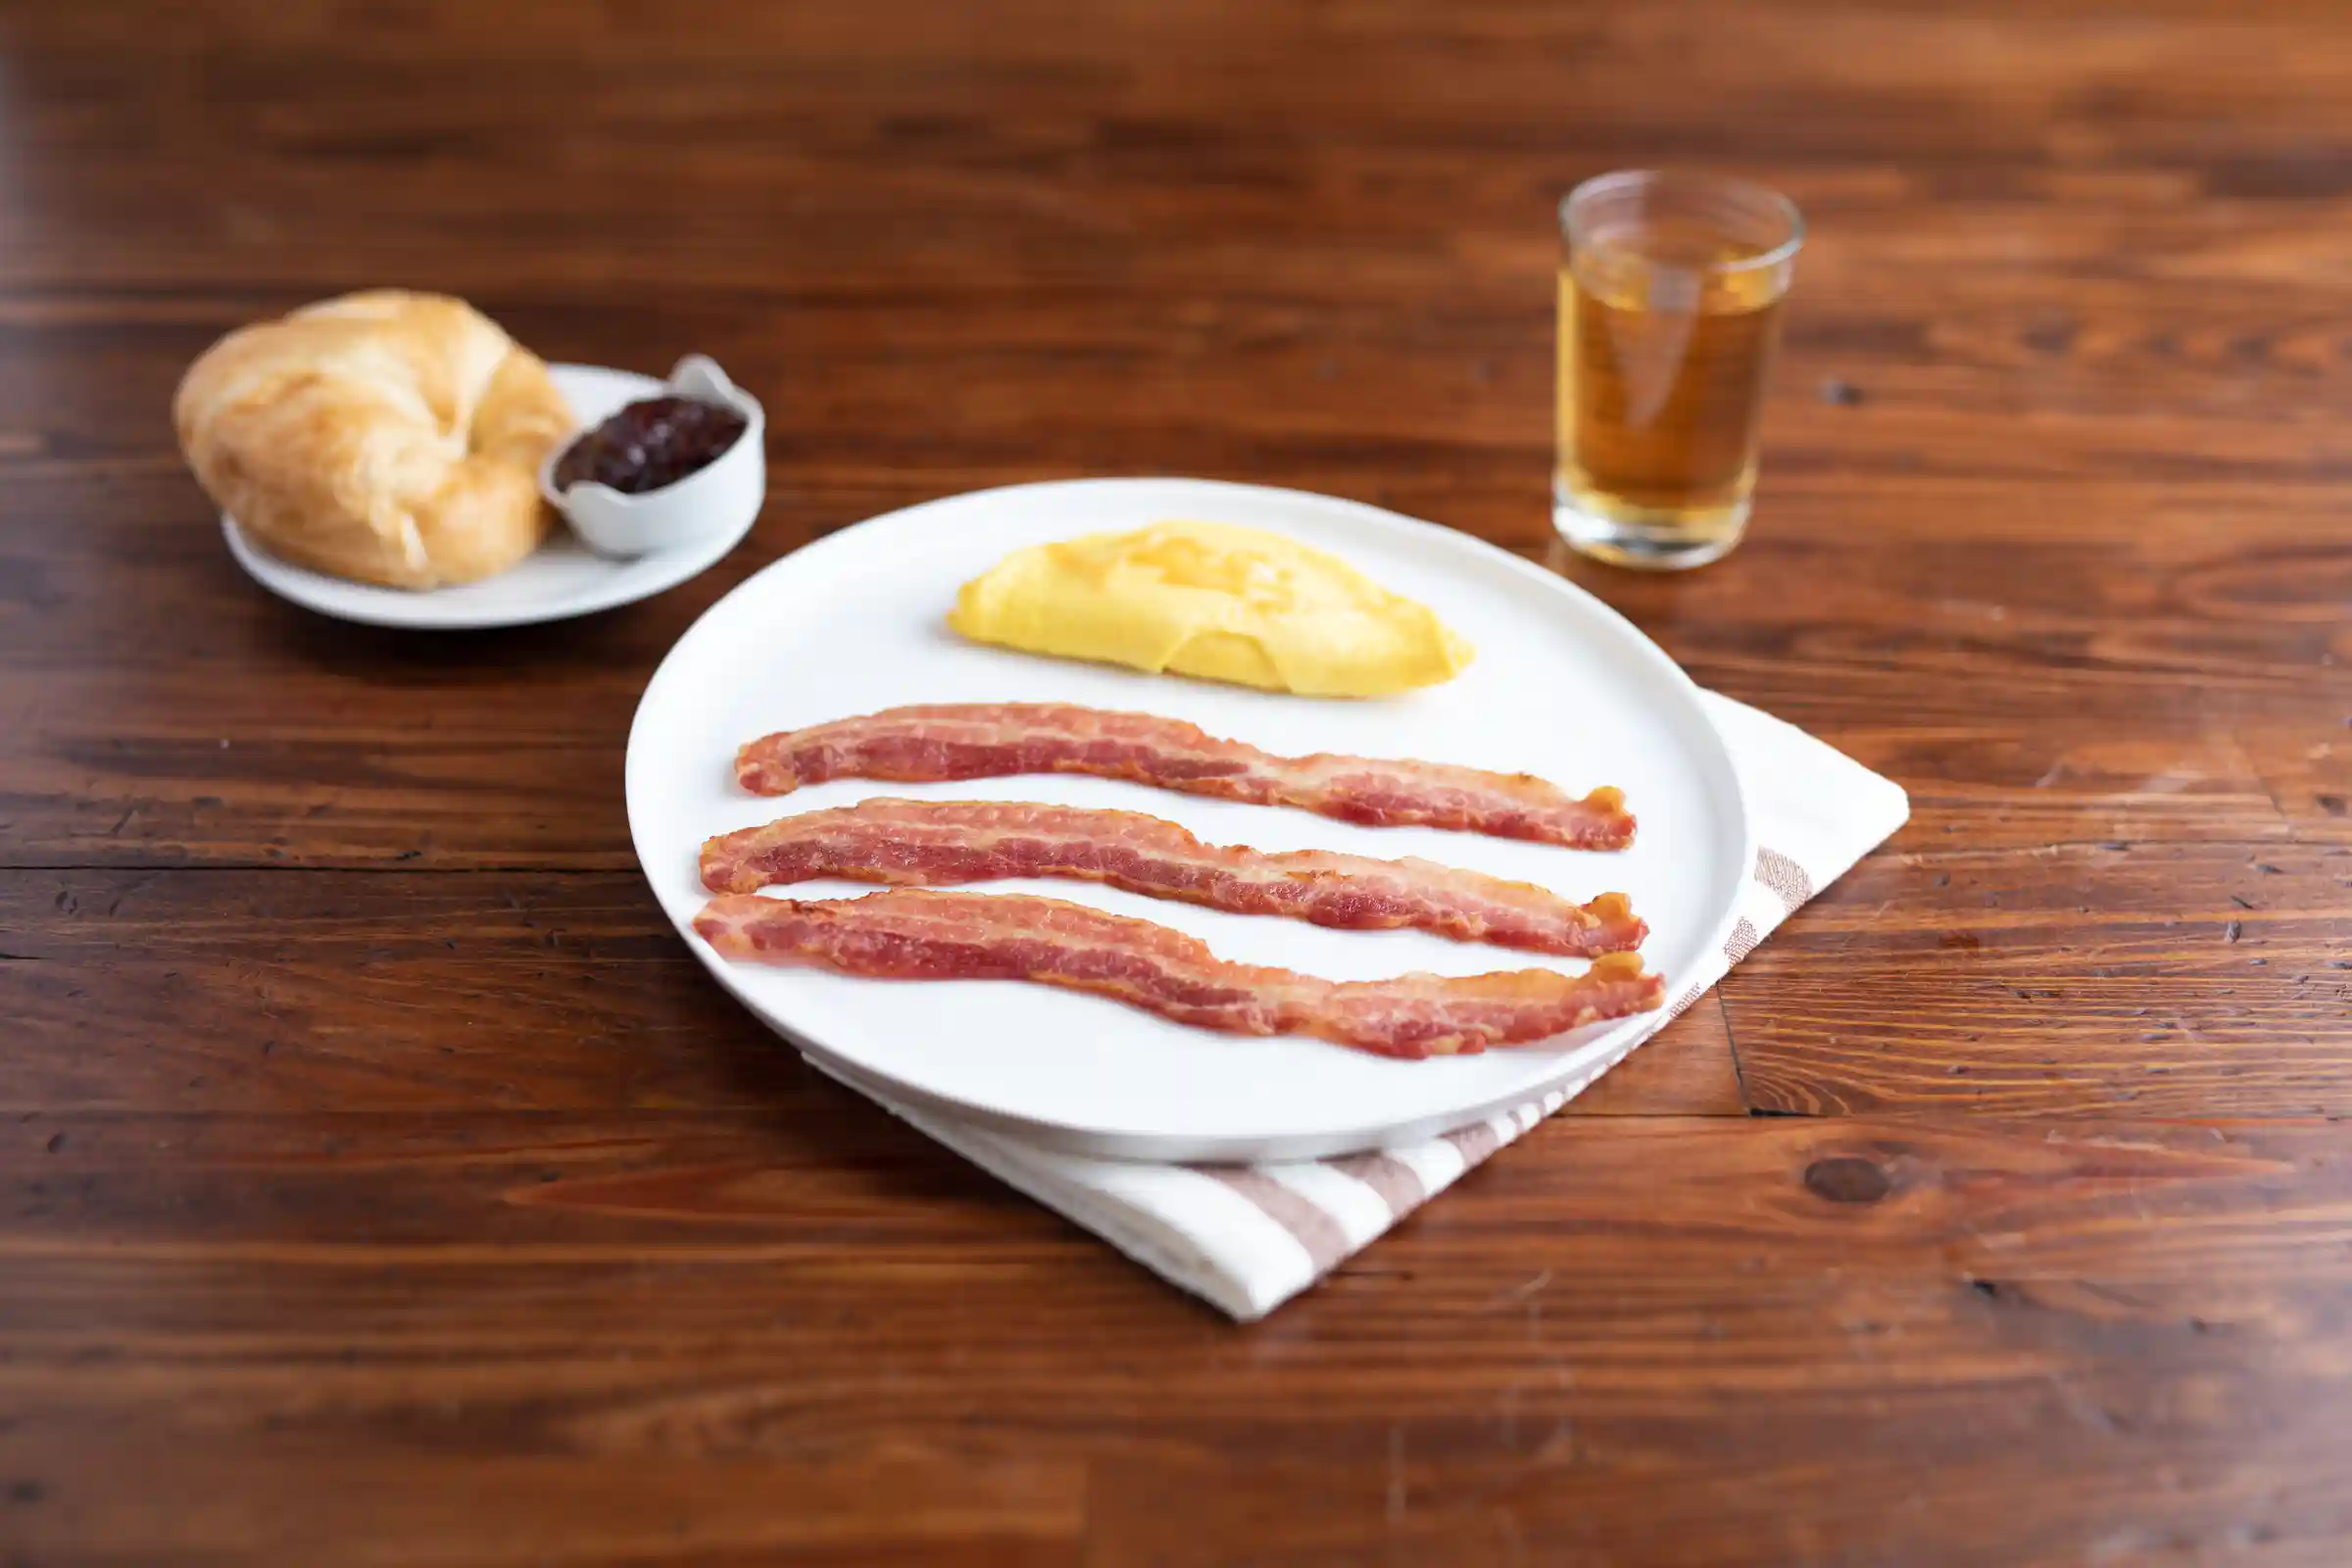 Wright® Brand Naturally Applewood Smoked Thin Sliced Bacon, Flat-Pack®, 15 Lbs, 18-22 Slices per Pound, Frozen_image_11